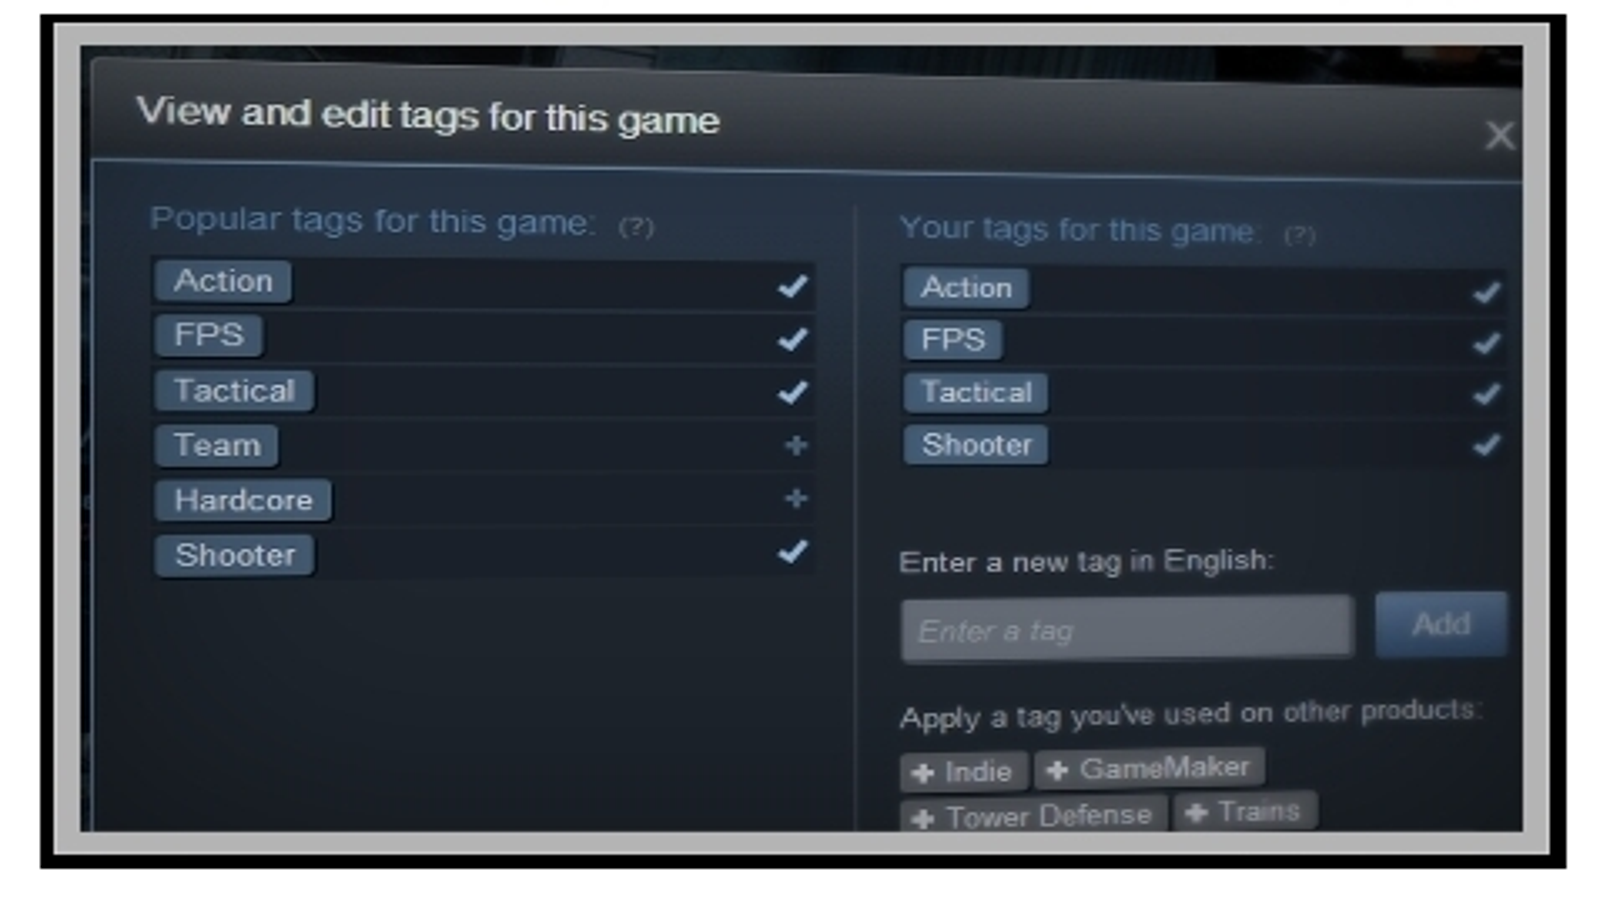 Tag Online on Steam